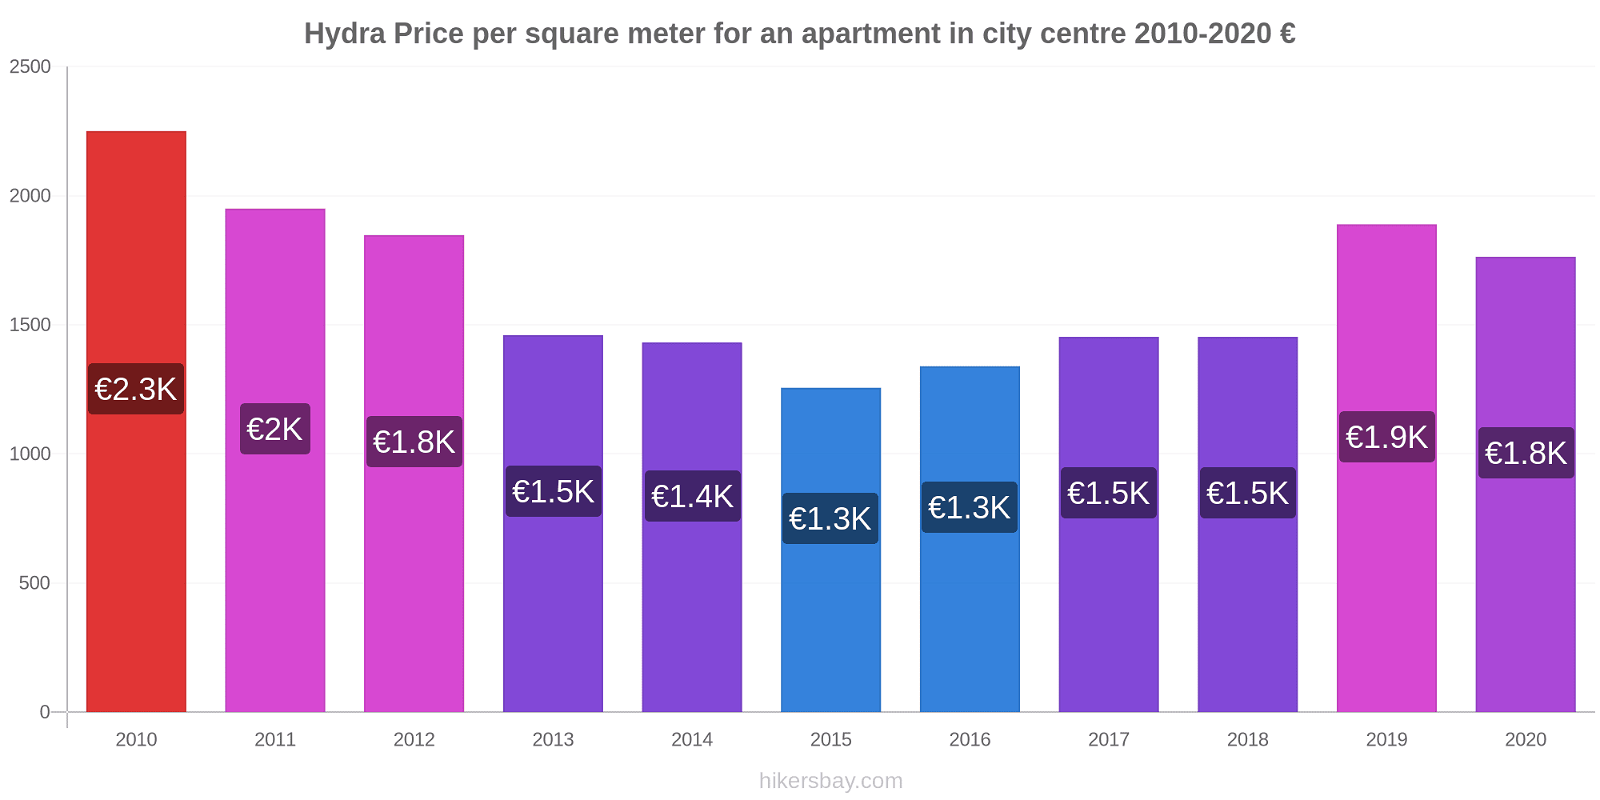 Hydra price changes Price per square meter for an apartment in city centre hikersbay.com